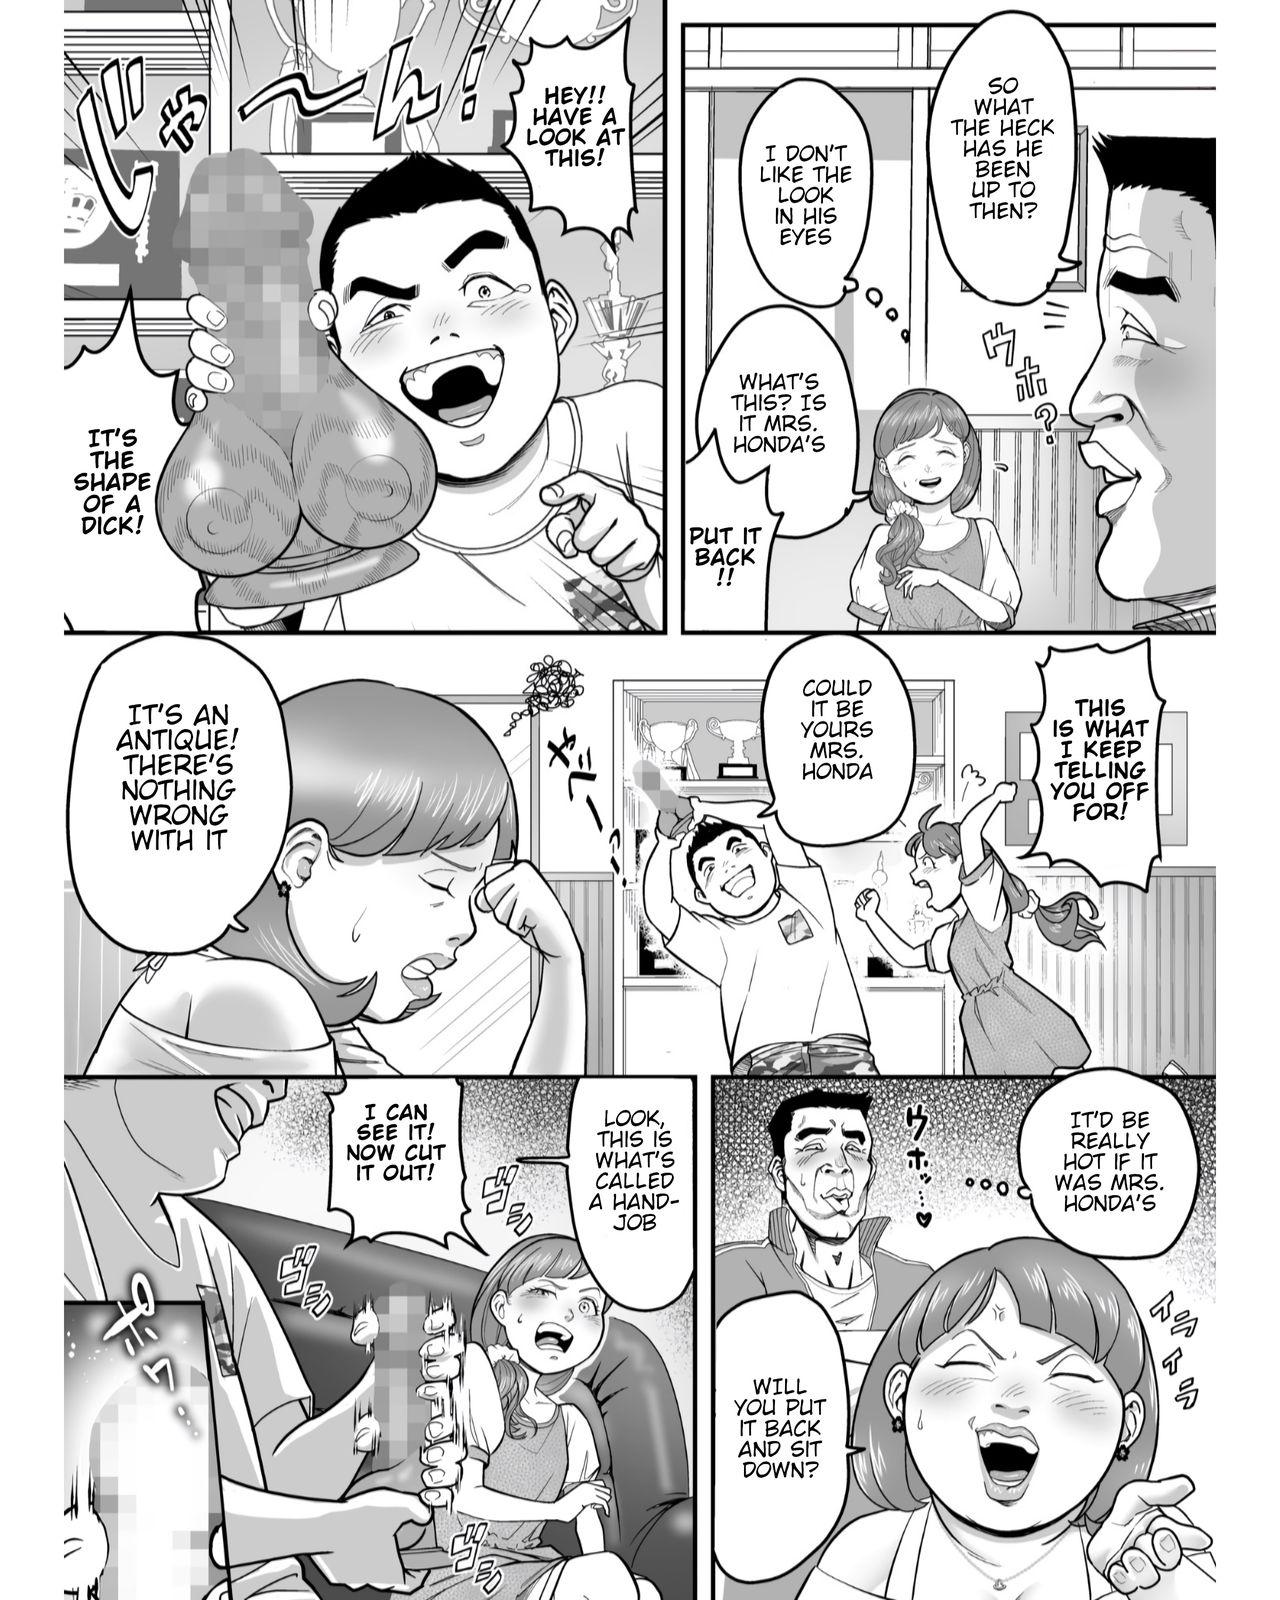 Hot Blow Jobs I've turned into that old hag Honda! - Original Naked - Page 4